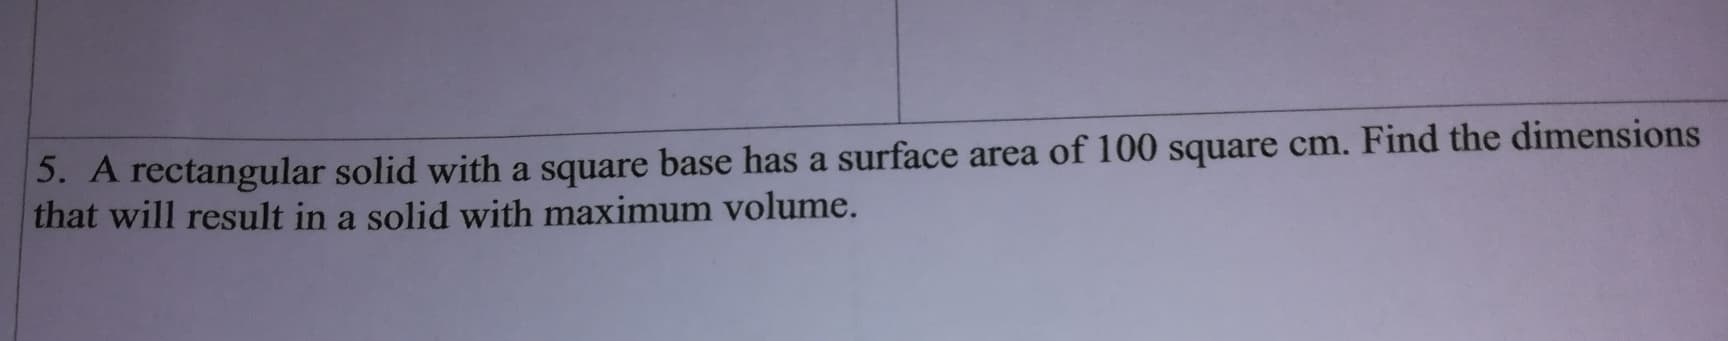 5. A rectangular solid with a square base has a surface area of 100 square cm. Find the dimensions
that will result in a solid with maximum volume.
